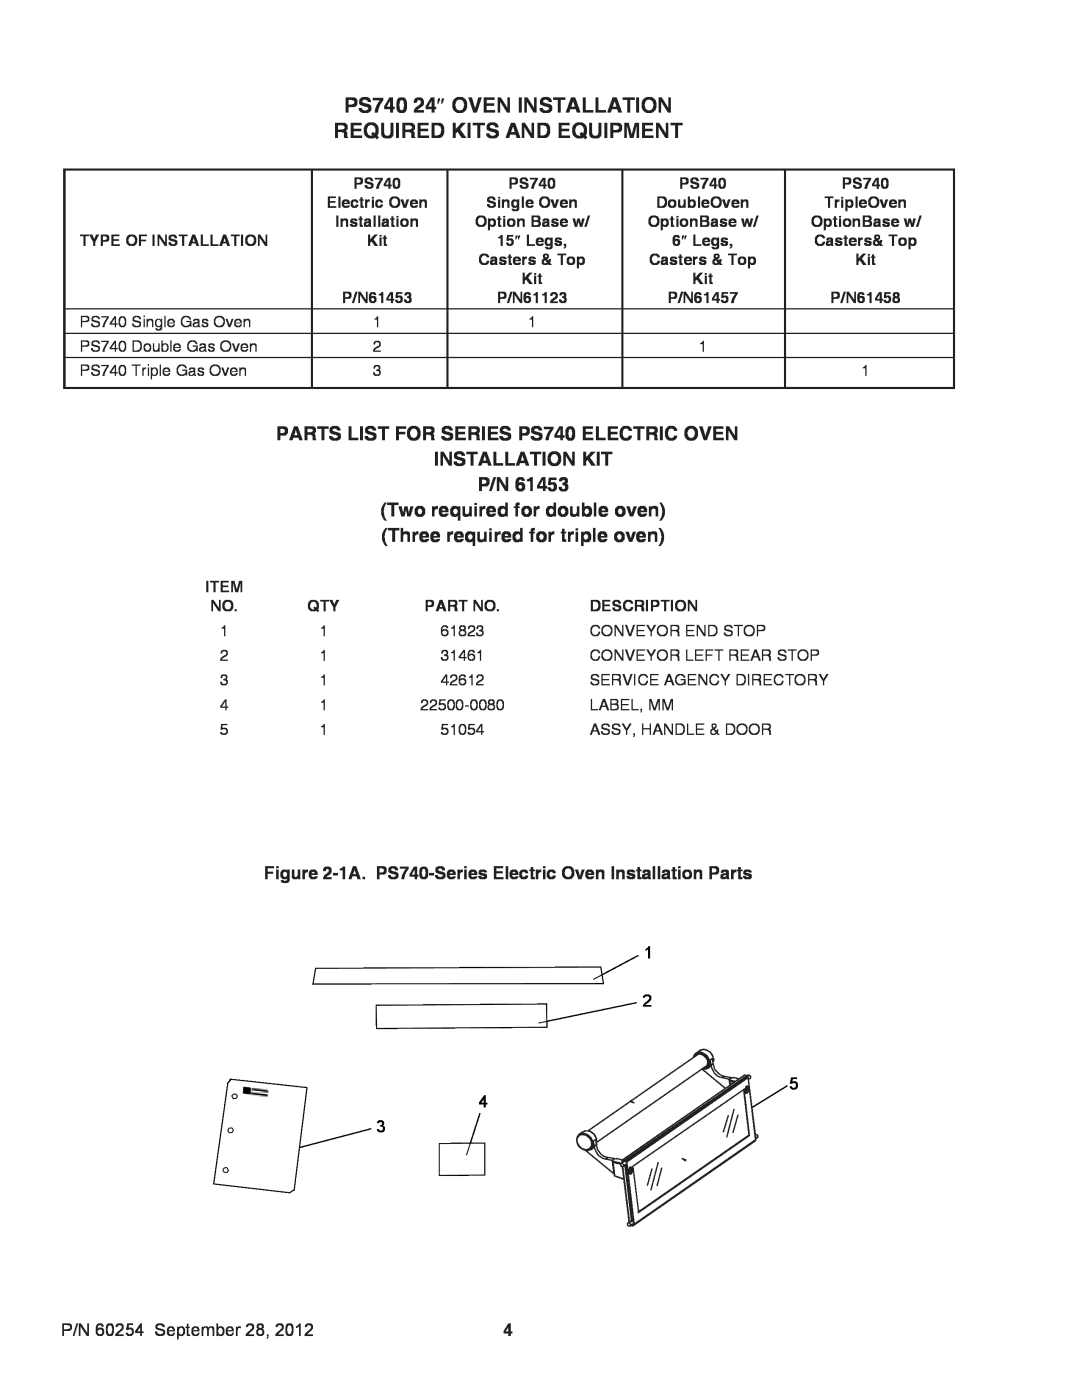 Middleby Marshall PS740 24″ OVEN INSTALLATION REQUIRED KITS AND EQUIPMENT, P/N 60254 September 28, Electric Oven 